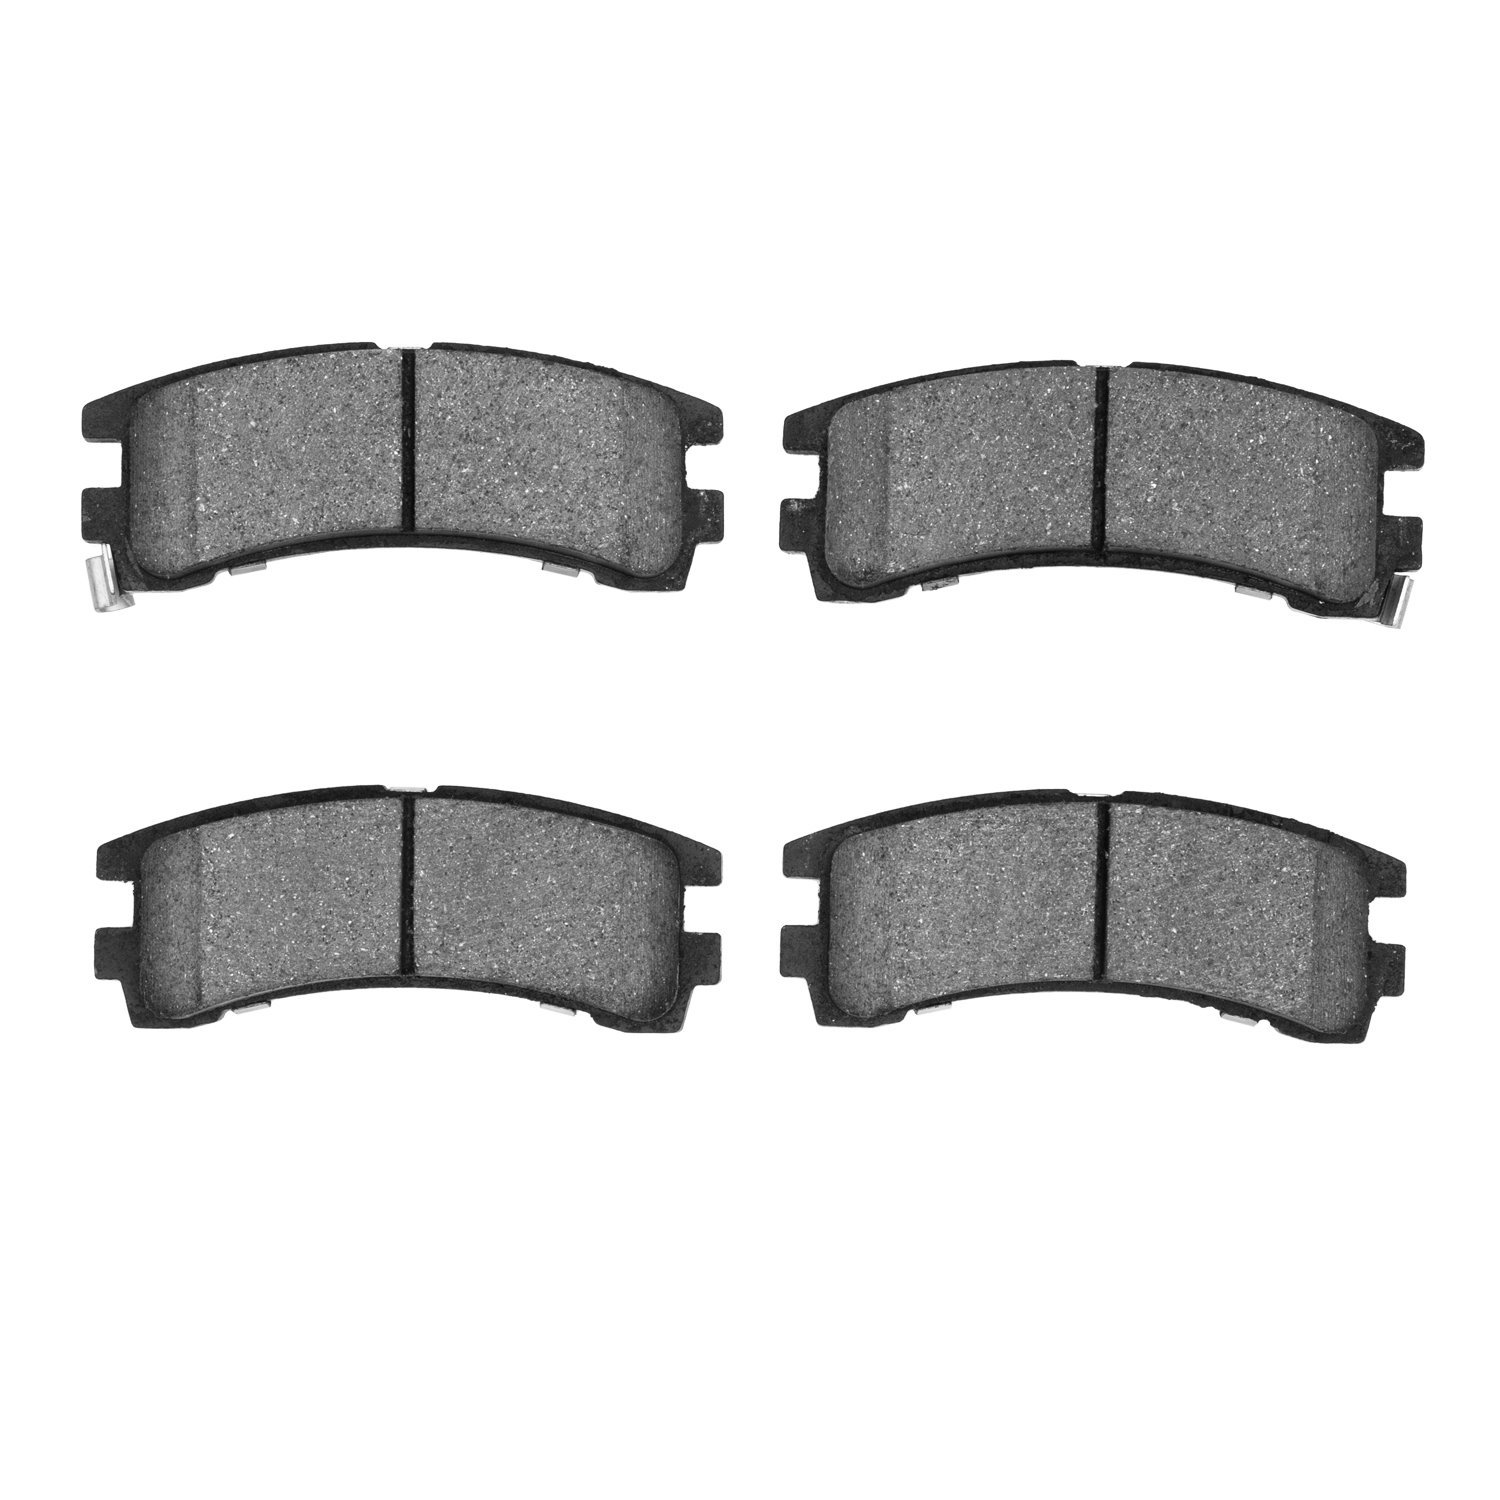 1903-0401-00 Premium Riveted Brake Shoes, 1968-1989 Ford/Lincoln/Mercury/Mazda, Position: Rr,Rear